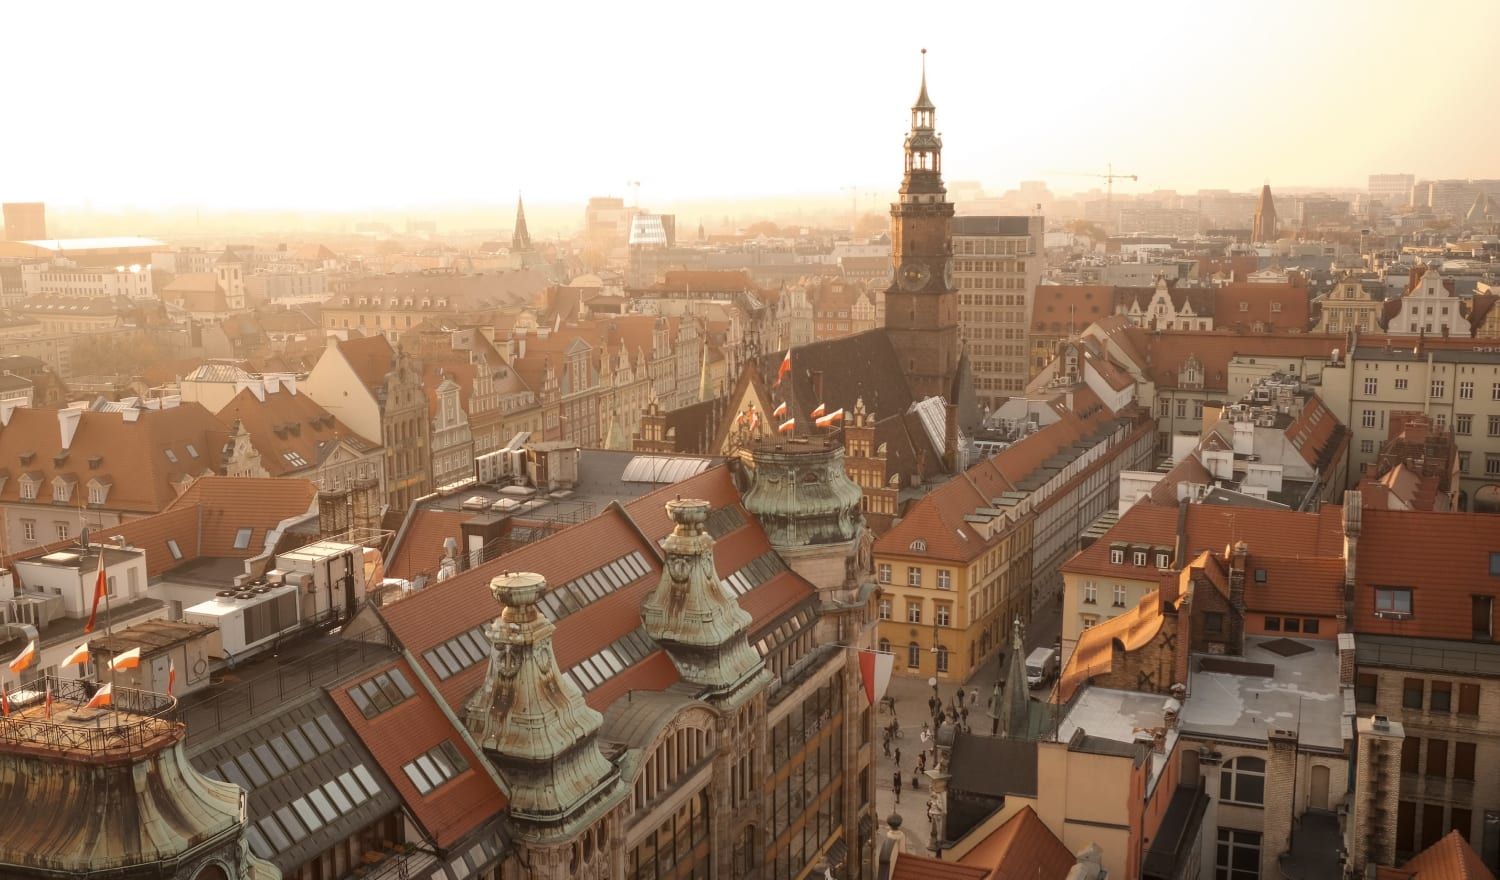 The enchanting old city of Wrocław.